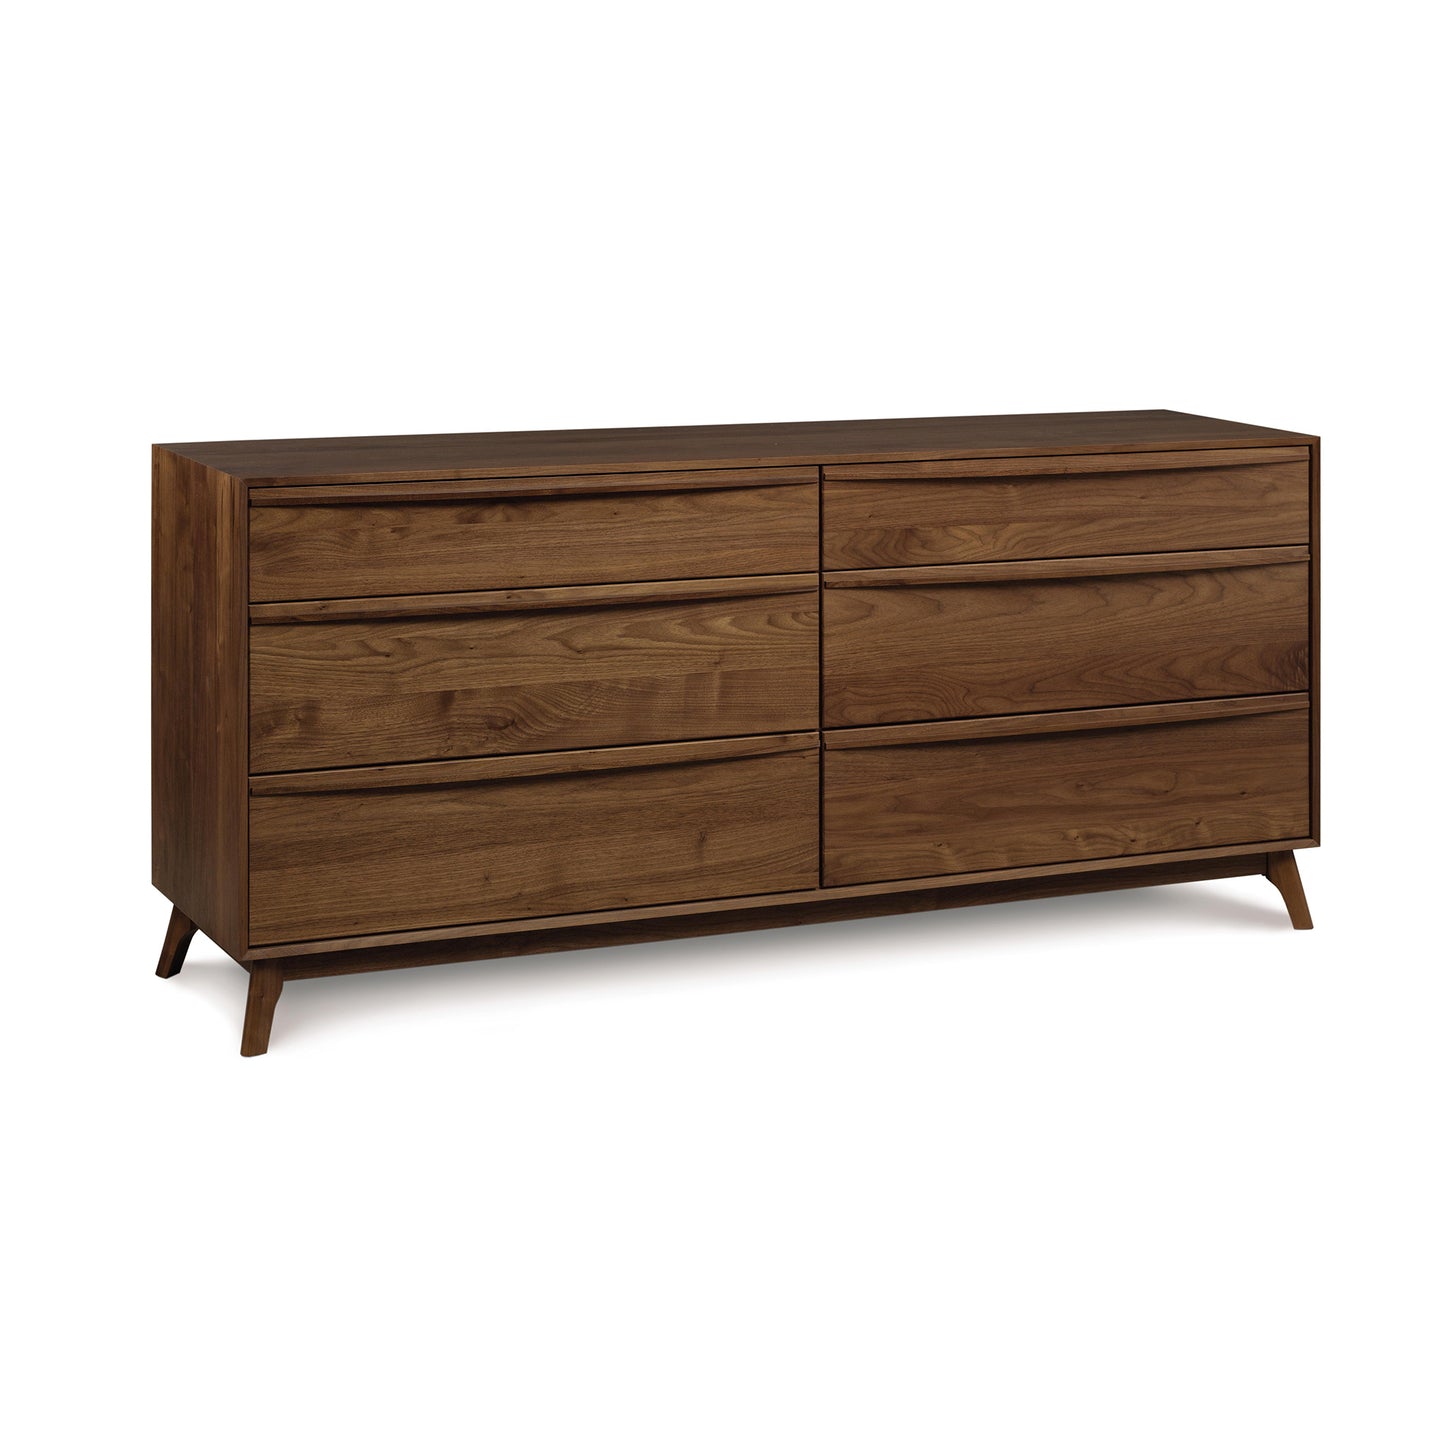 A modern Copeland Furniture Catalina 6-Drawer Dresser crafted from solid natural hardwood, displayed against a plain background.